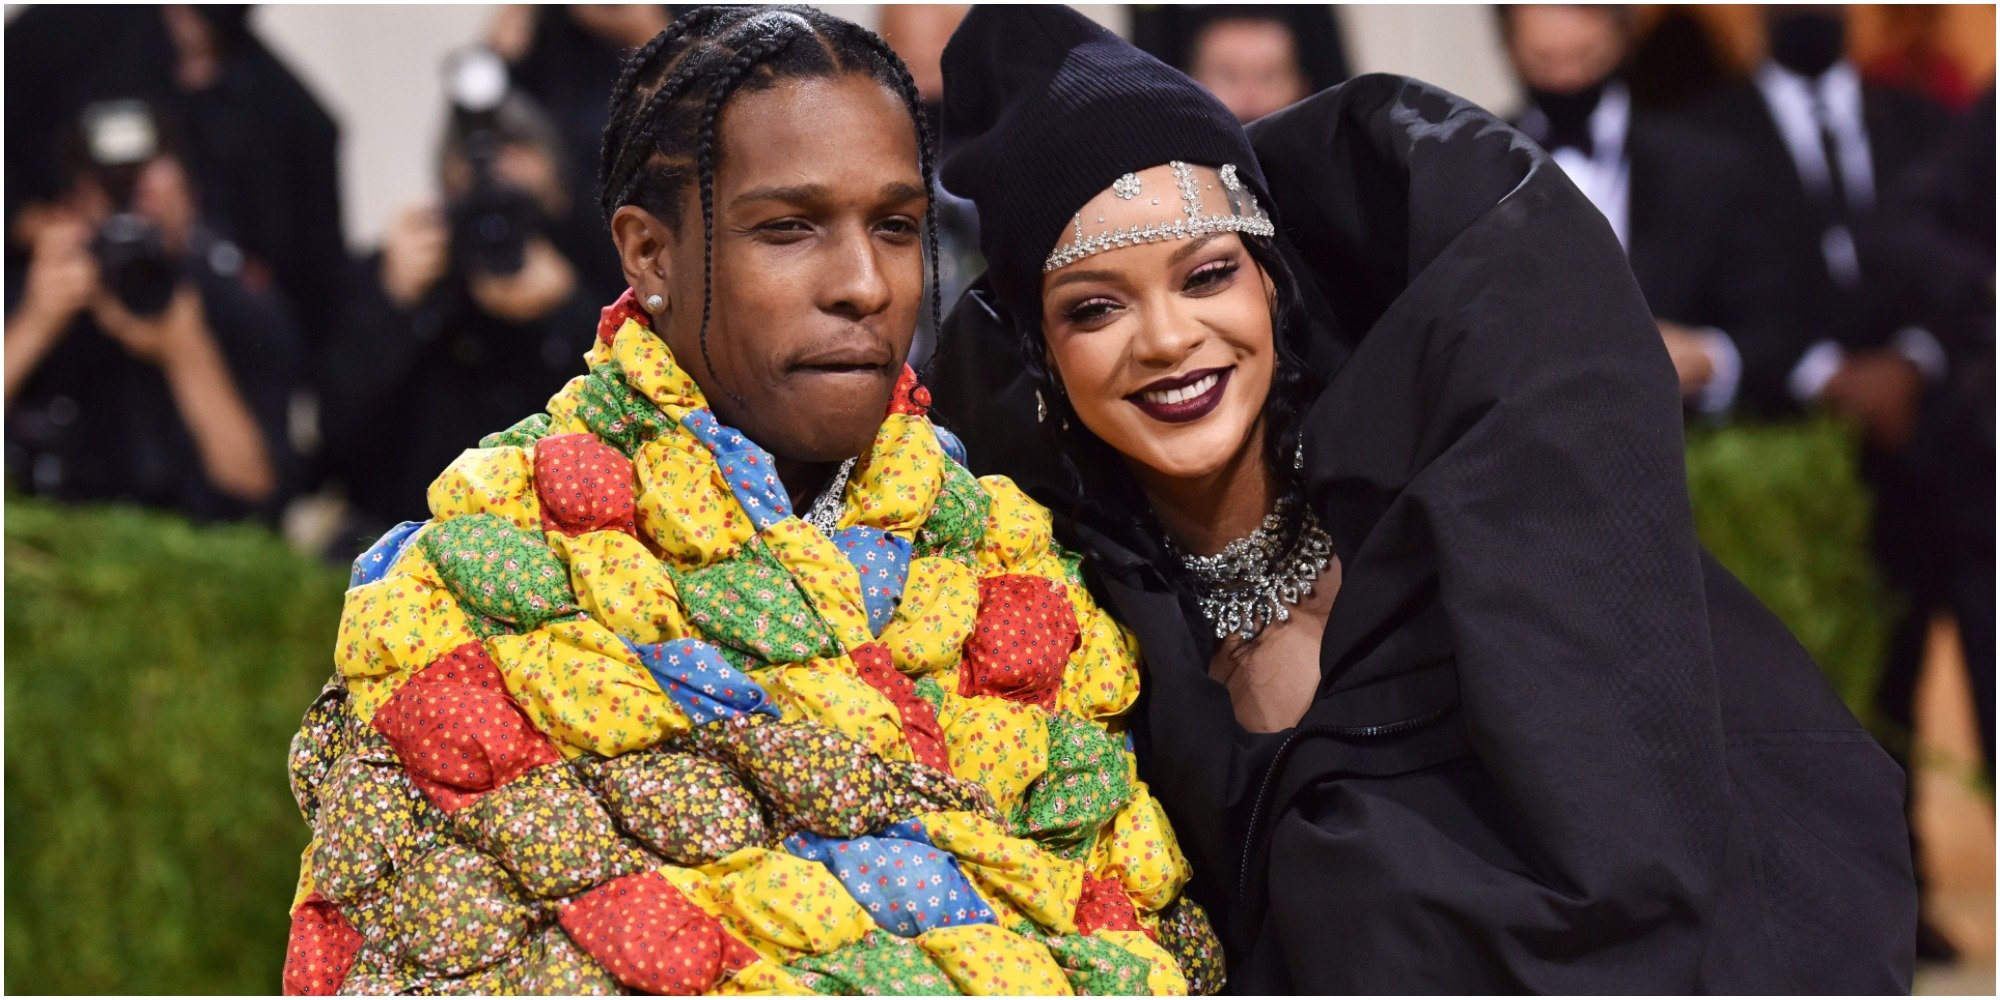 A$AP Rocky and Rihanna on the red carpet for the Met Gala 2021